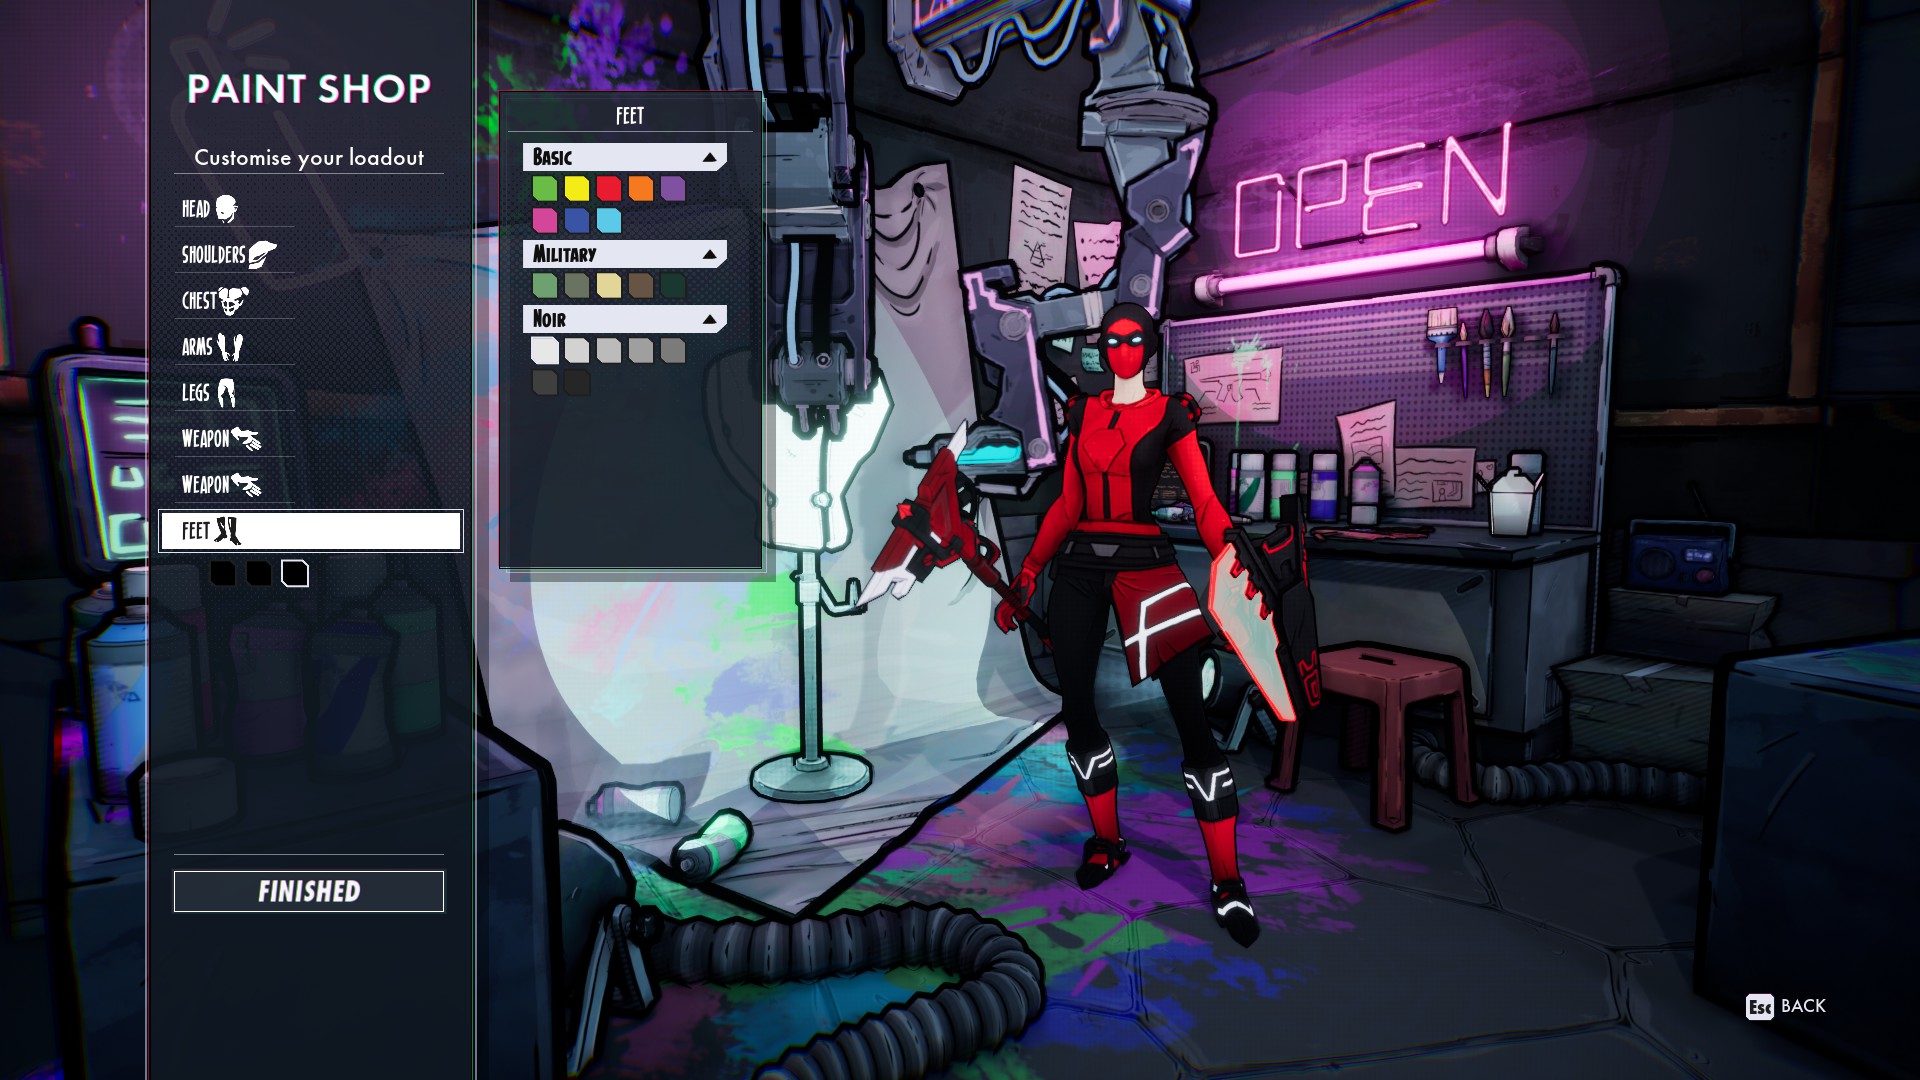 The player's character is standing with a menu to the left side of various colors available. Selection by armor/weapon piece may be chosen from.